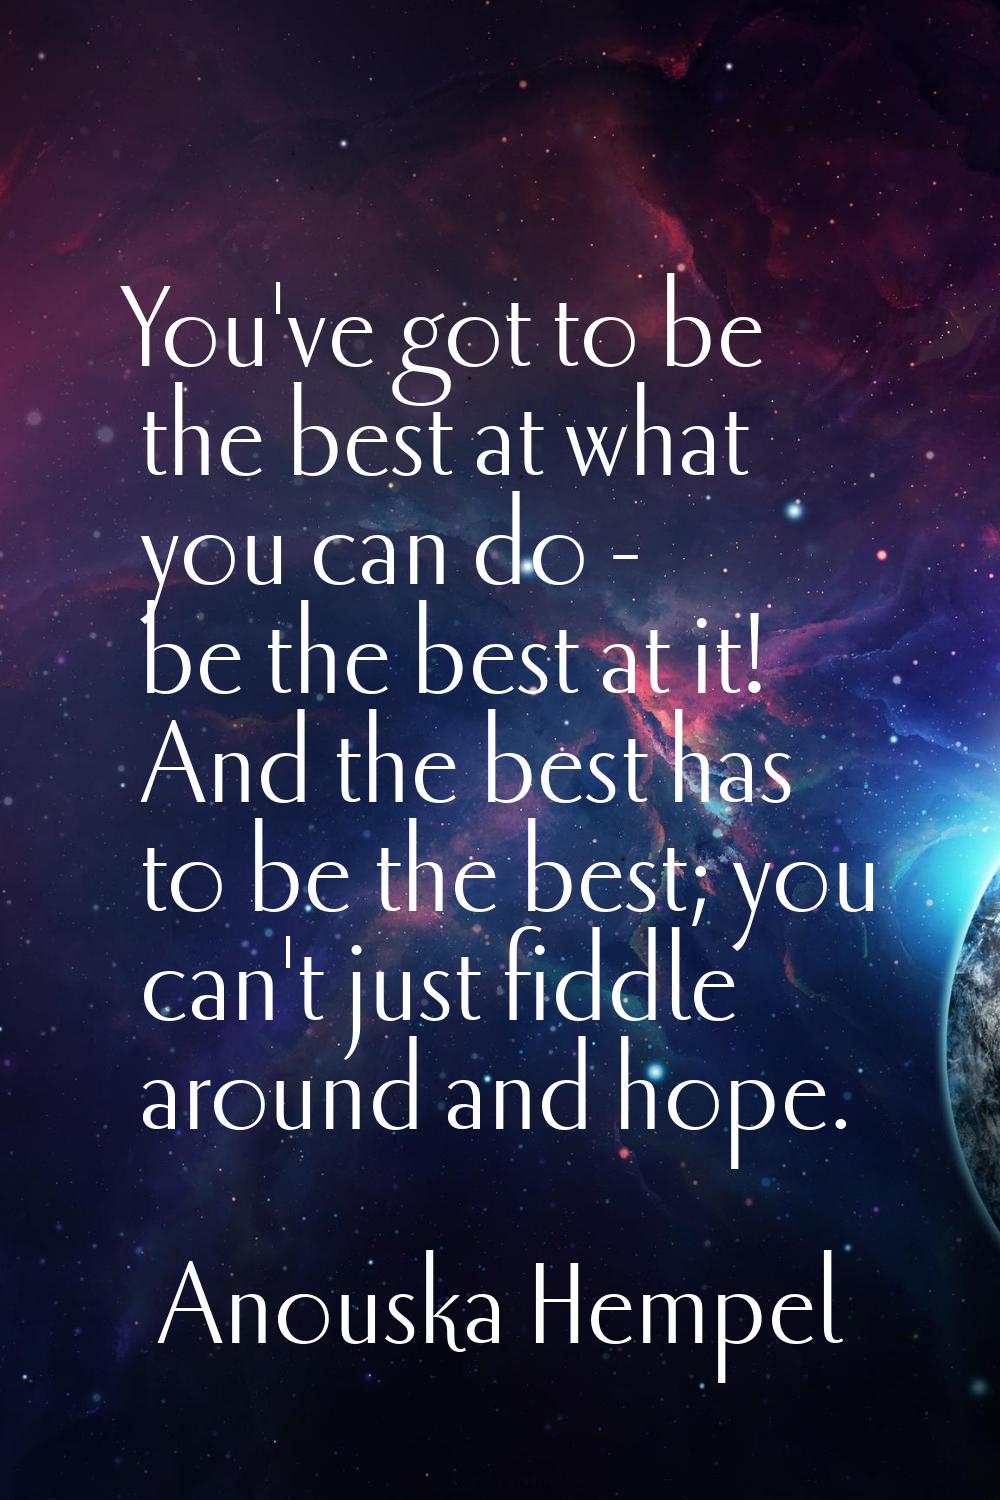 You've got to be the best at what you can do - be the best at it! And the best has to be the best; 